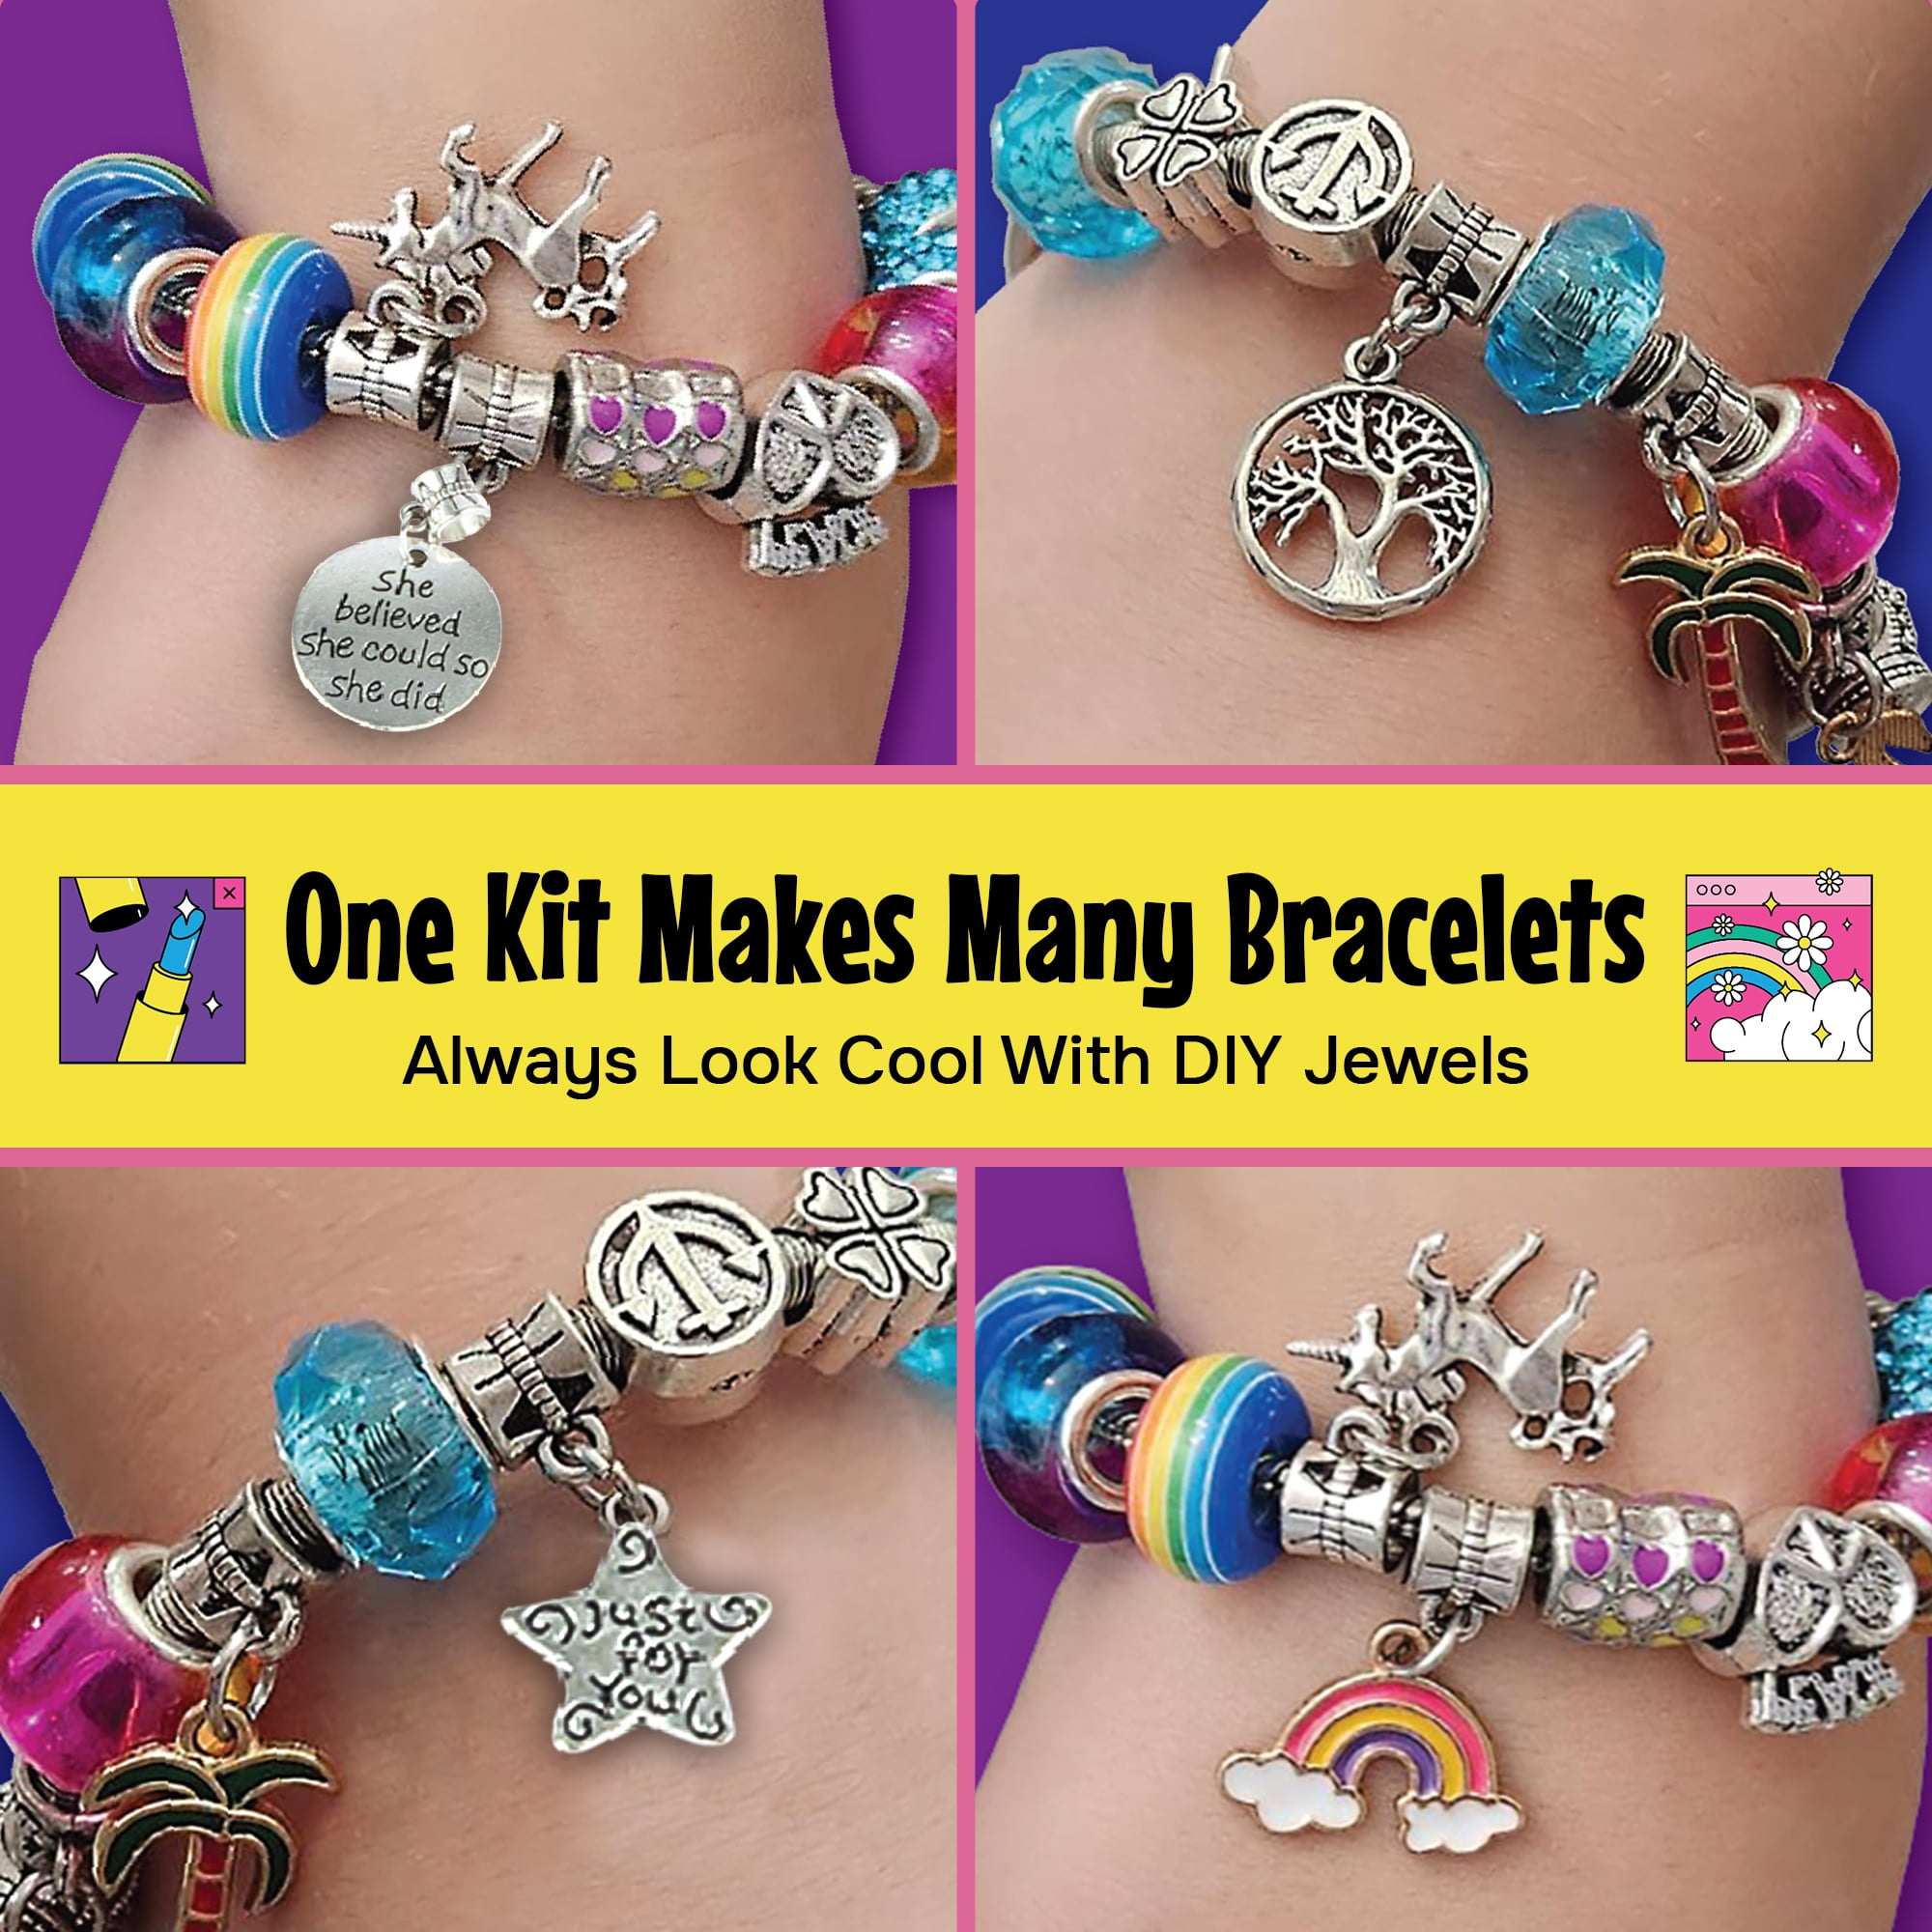 5-Minute Crafts - Bracelet Creating Kit for Ages 6+ As Seen on Social Media